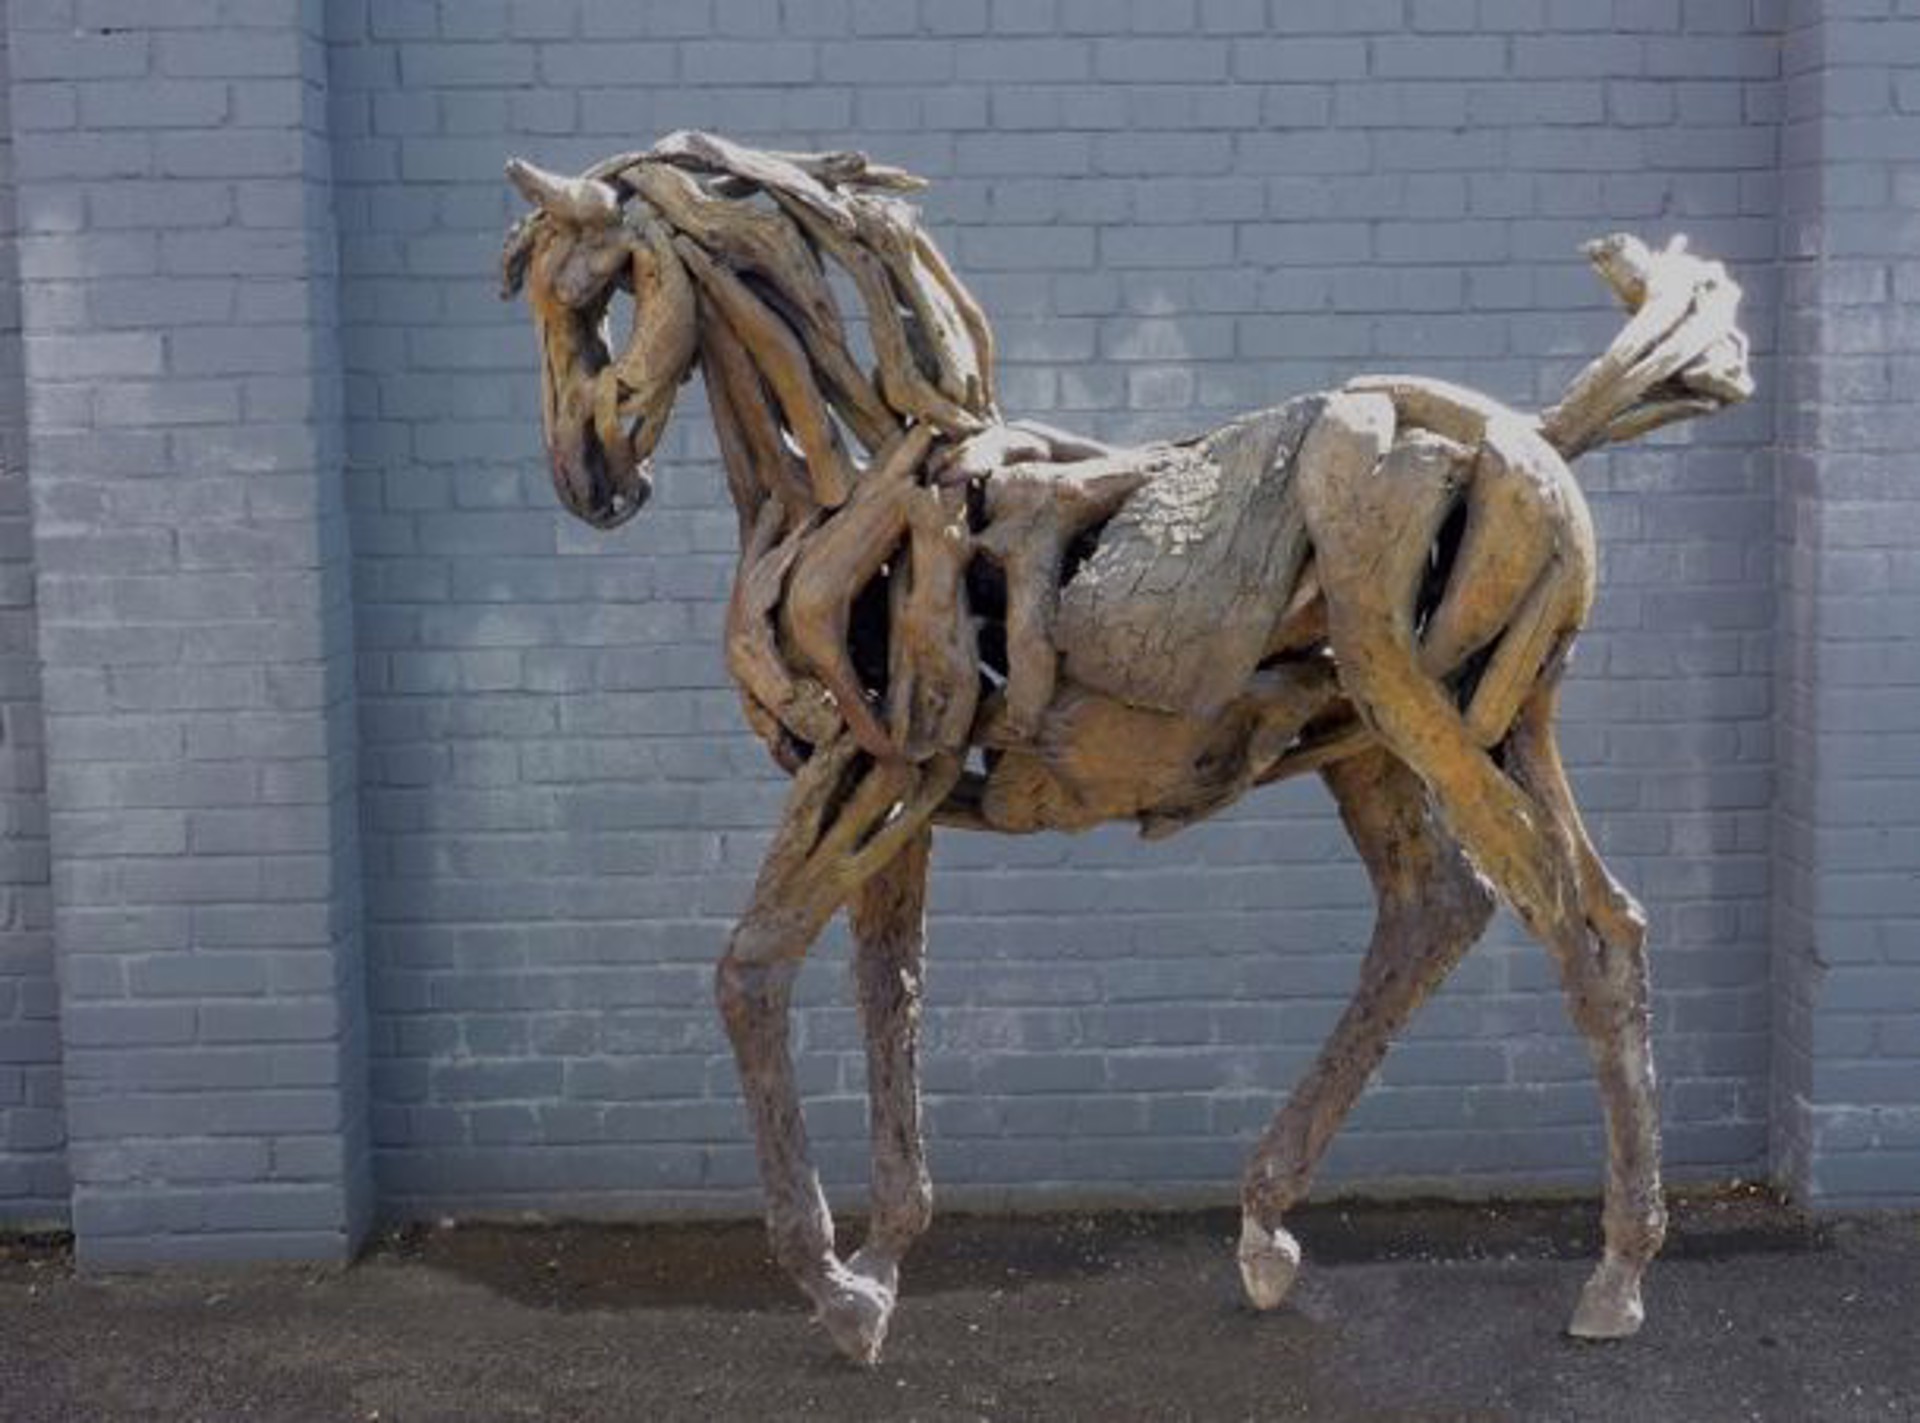 Dylan by Heather Jansch